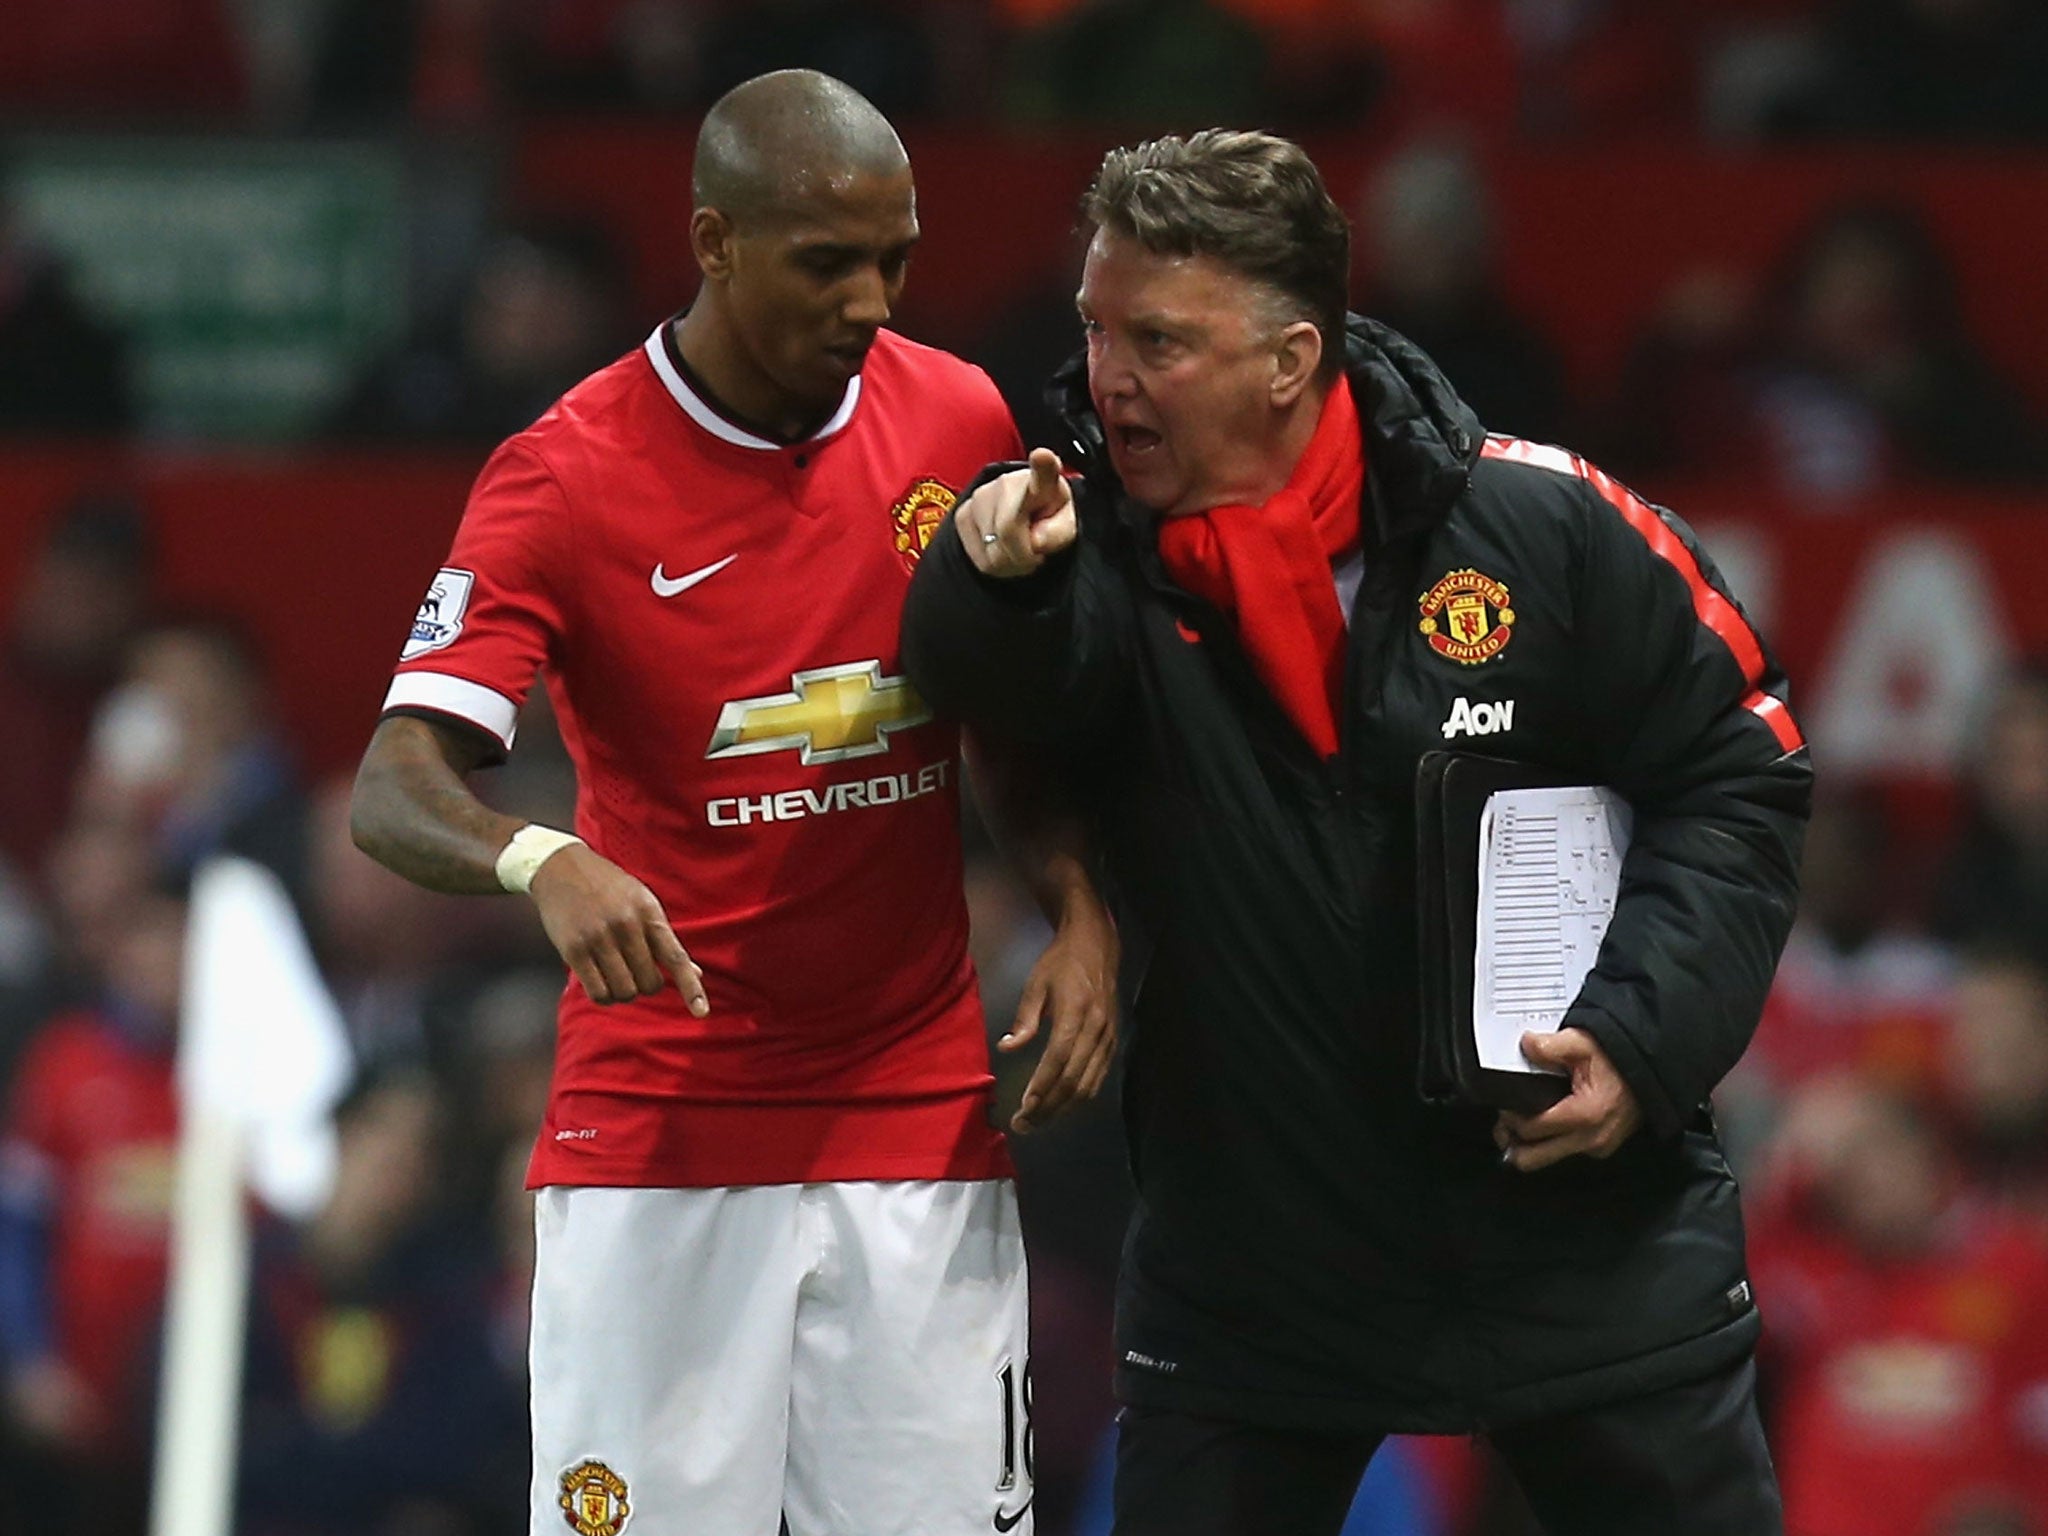 Van Gaal gives out directions to Ashley Young